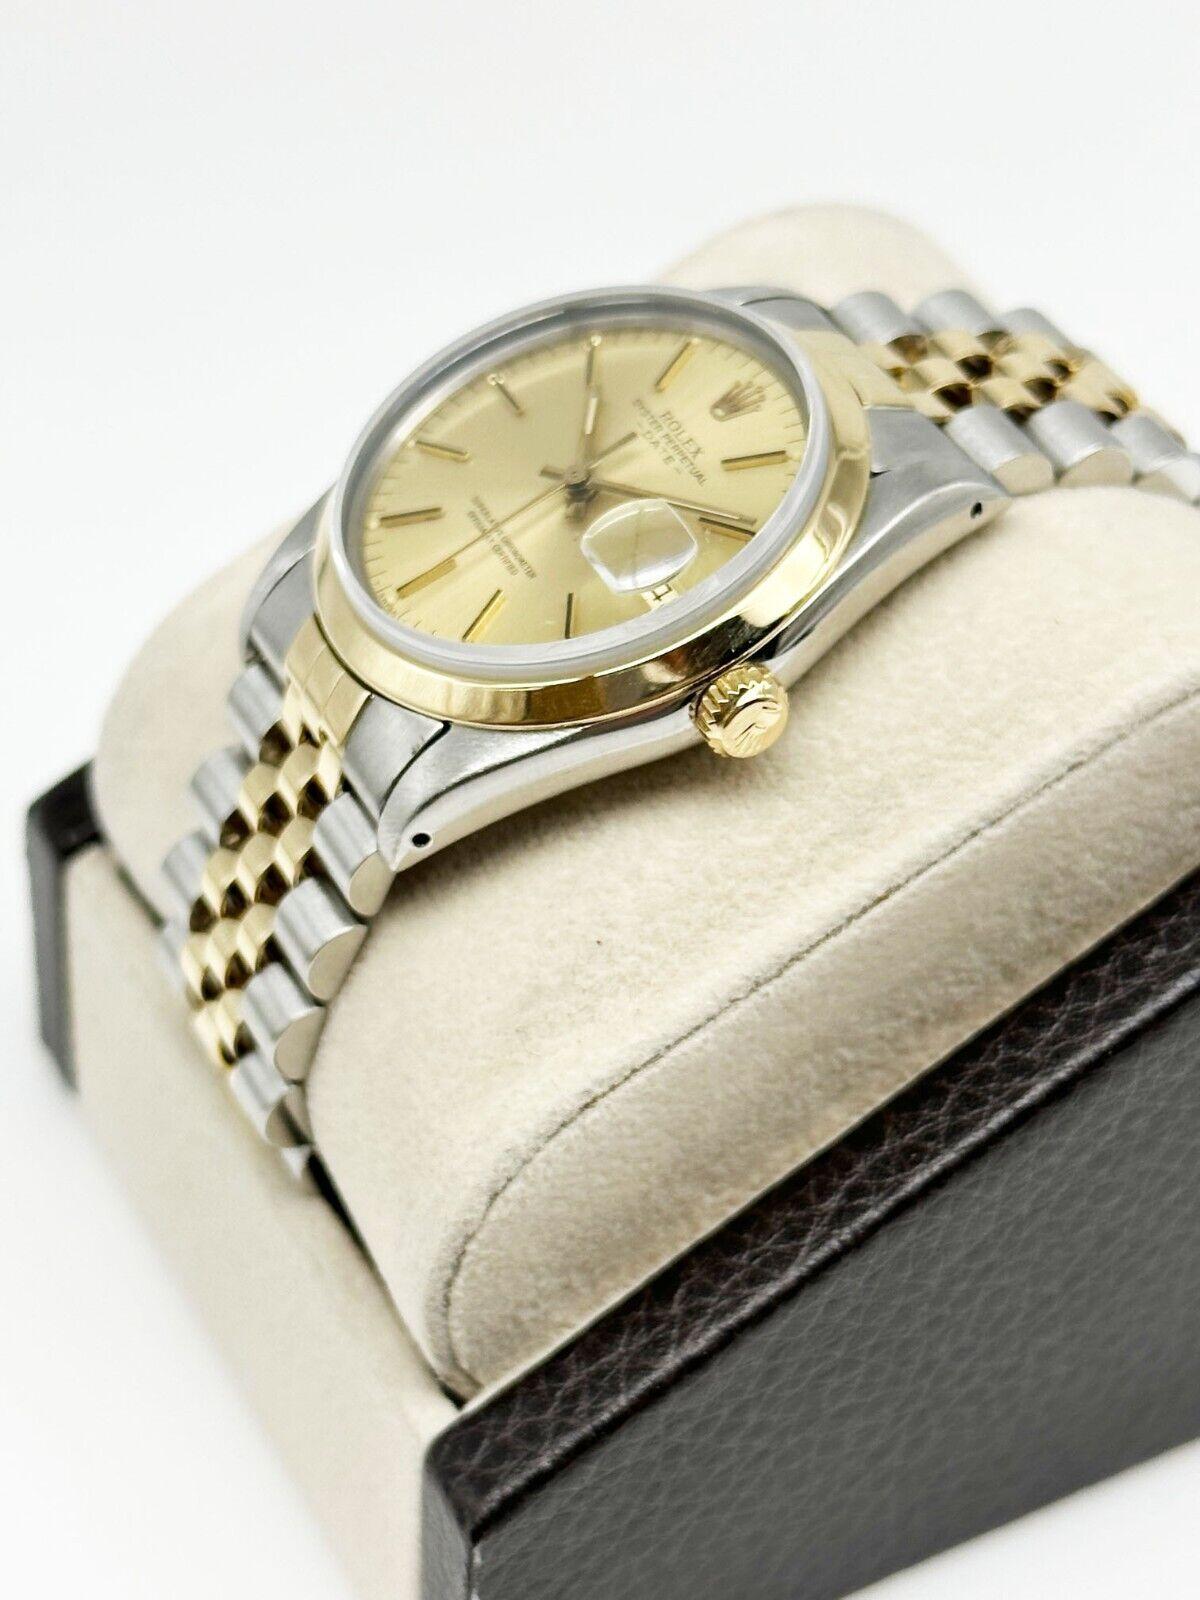 Rolex Date 15003 Champagne Dial 18K Yellow Gold Stainless Steel In Excellent Condition For Sale In San Diego, CA